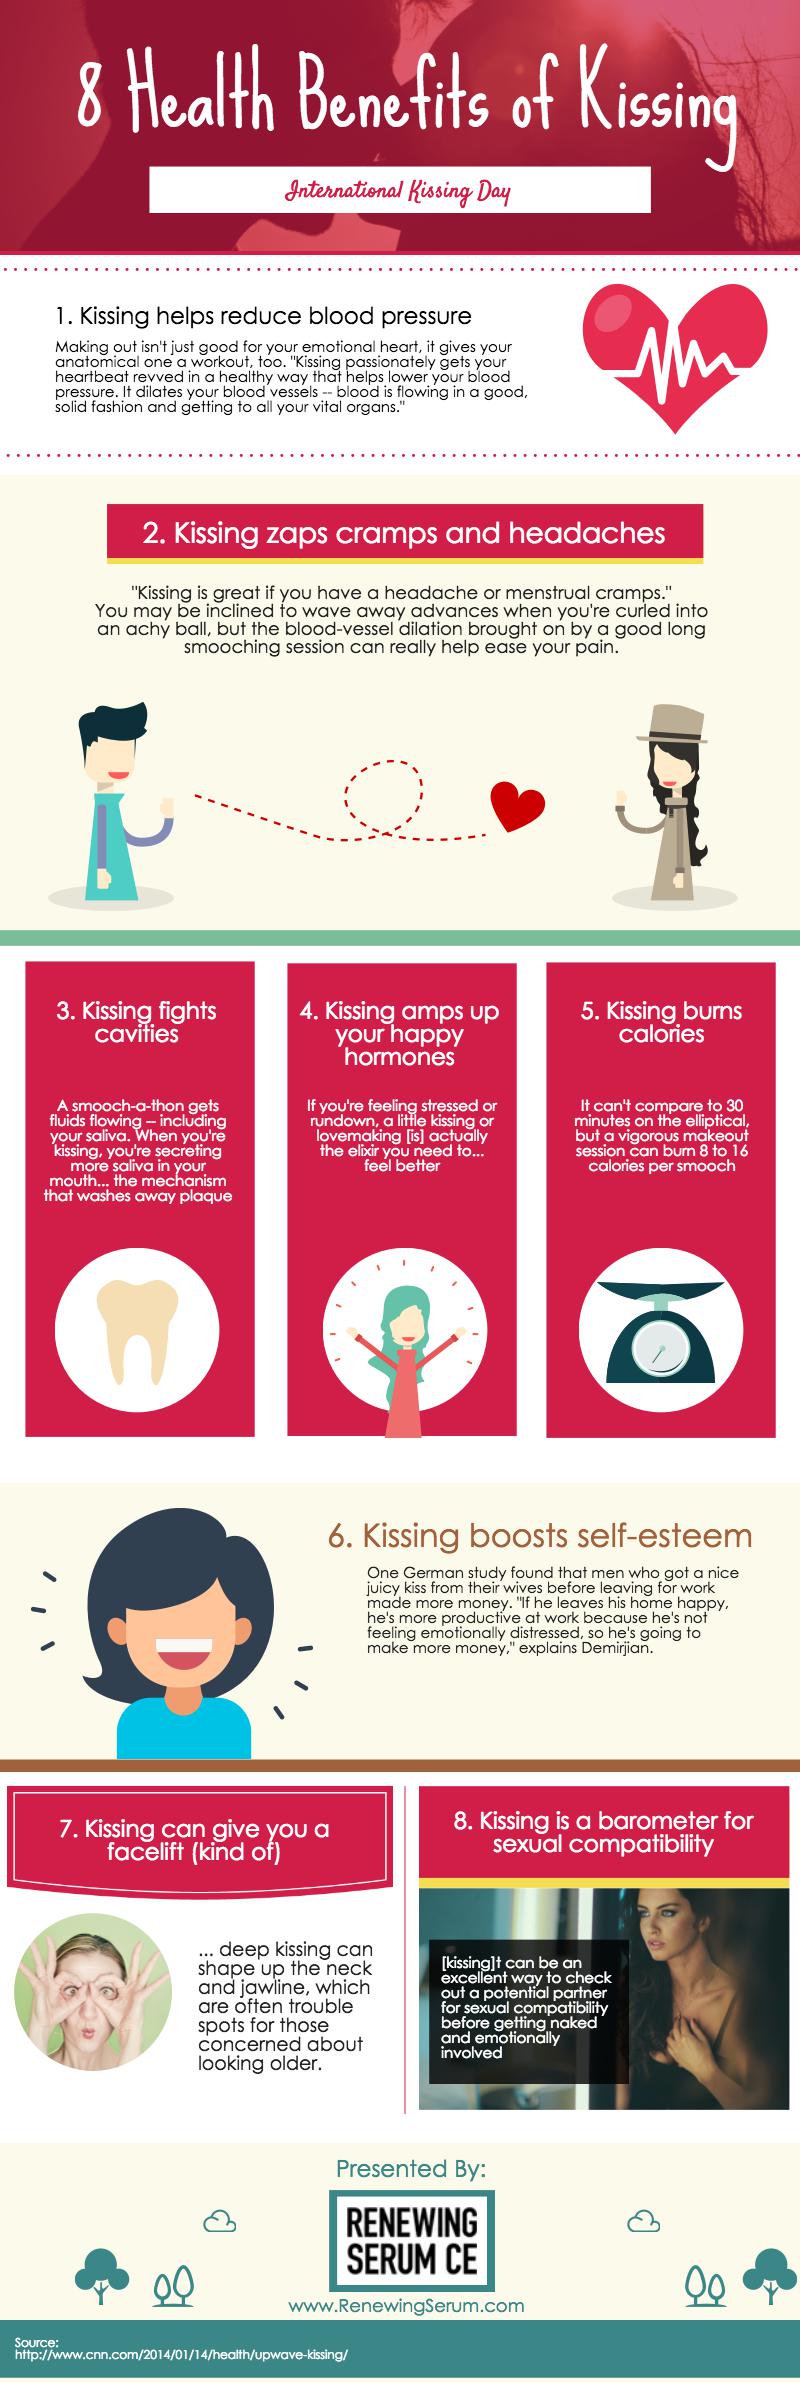 kissing benefits infographic